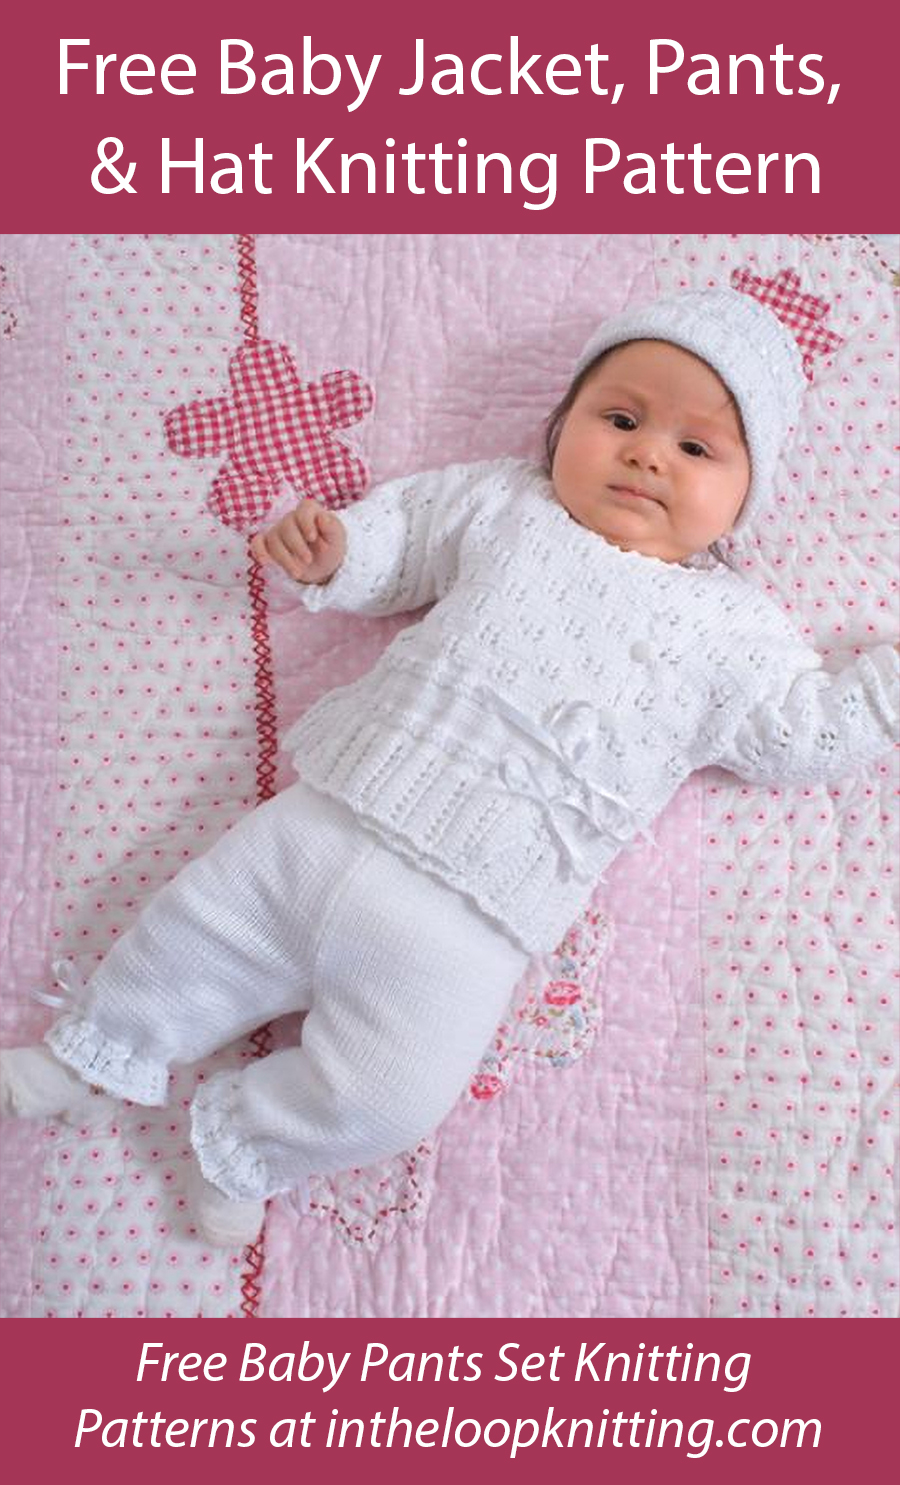 Free Baby Layettte Knitting Pattern Jacket and Pants with Hat Set 6359